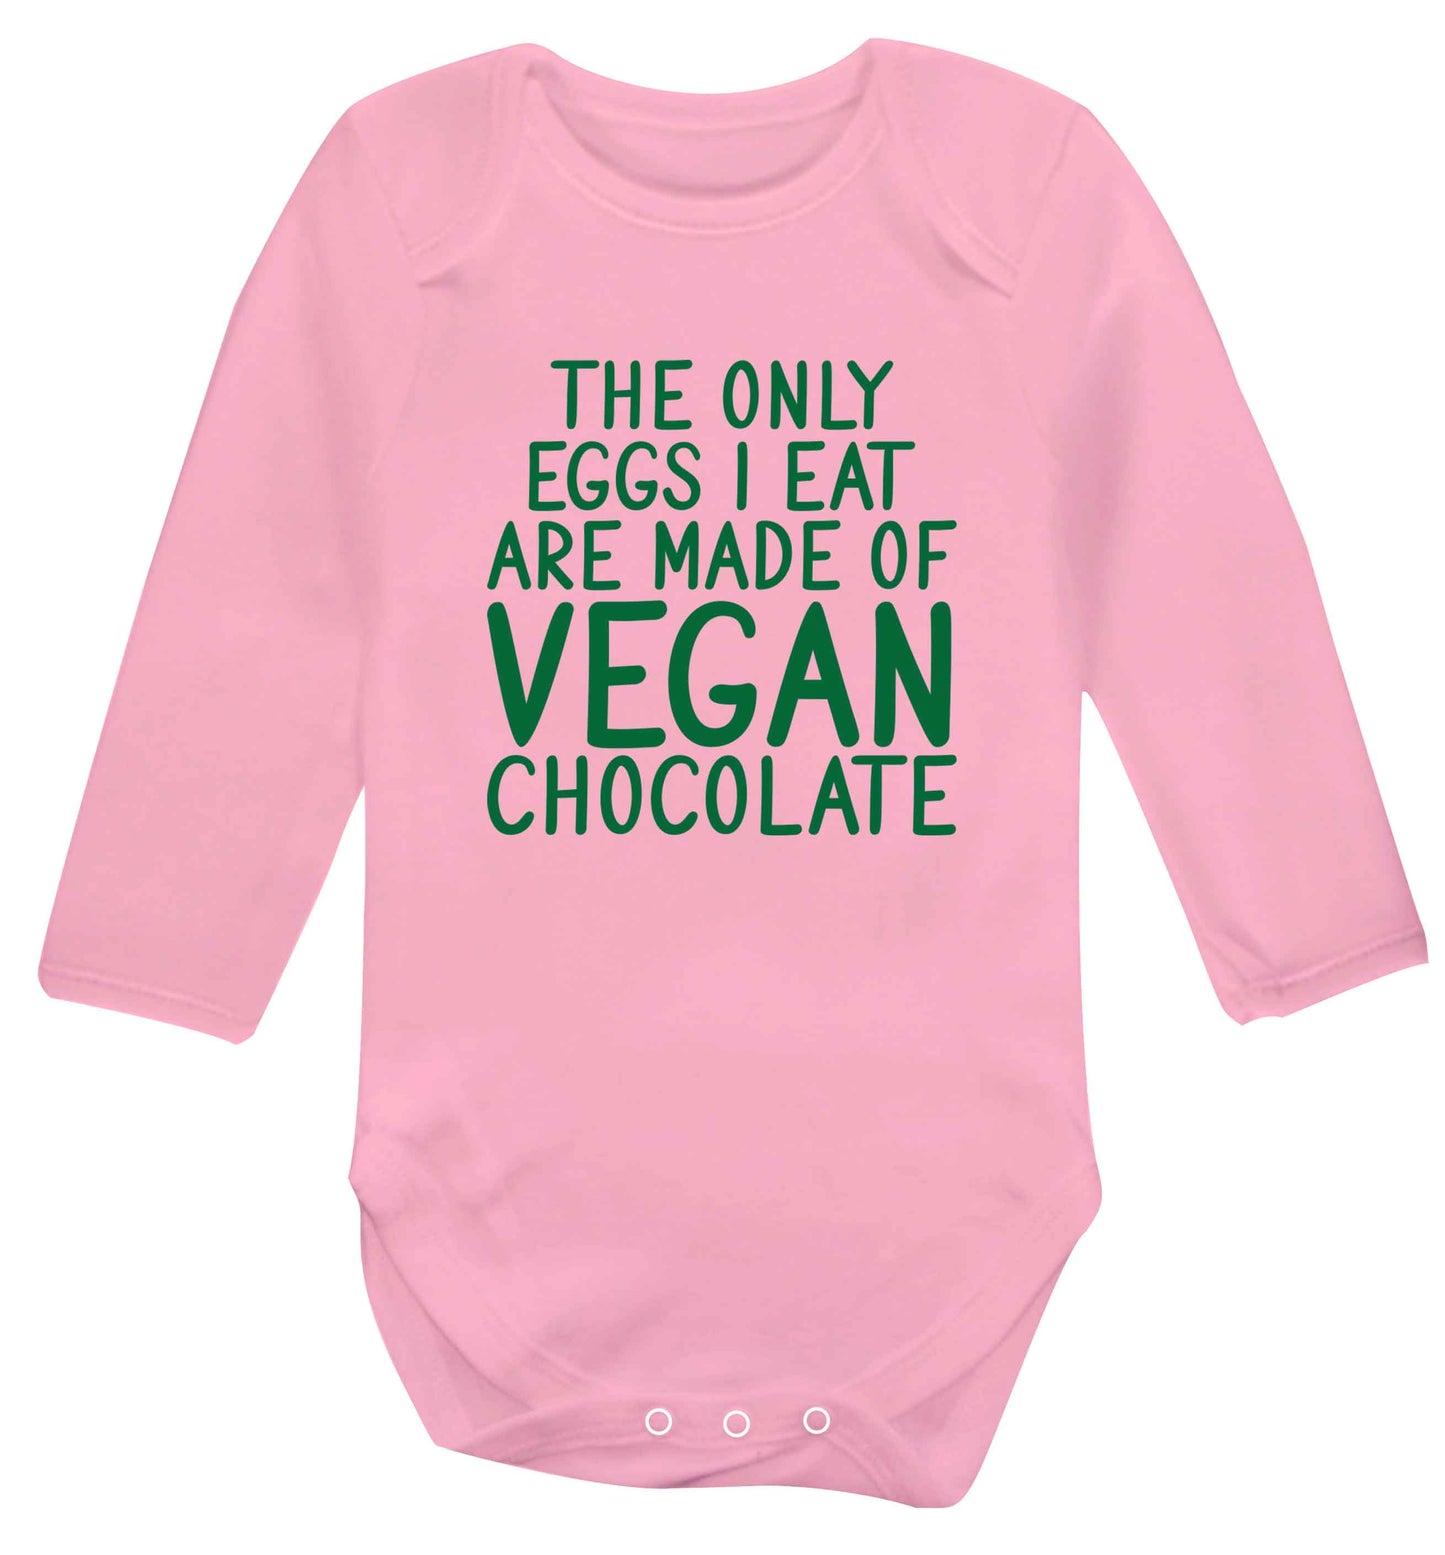 The only eggs I eat are made of vegan chocolate baby vest long sleeved pale pink 6-12 months